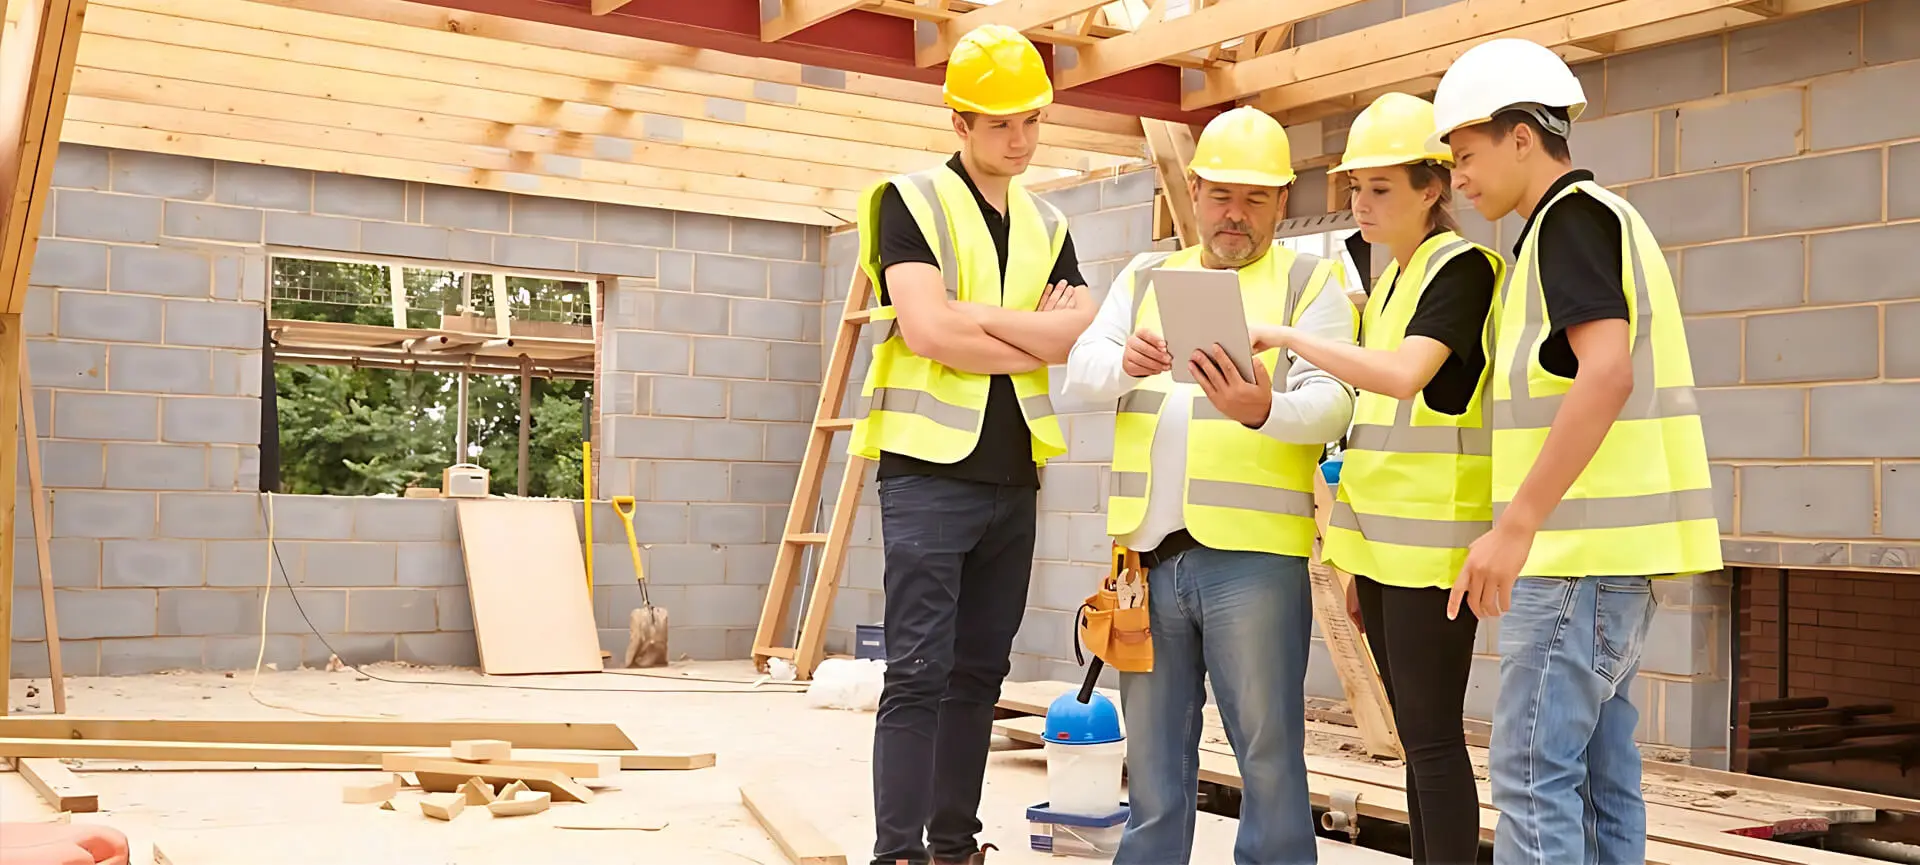 Three construction workers are looking at a tablet.